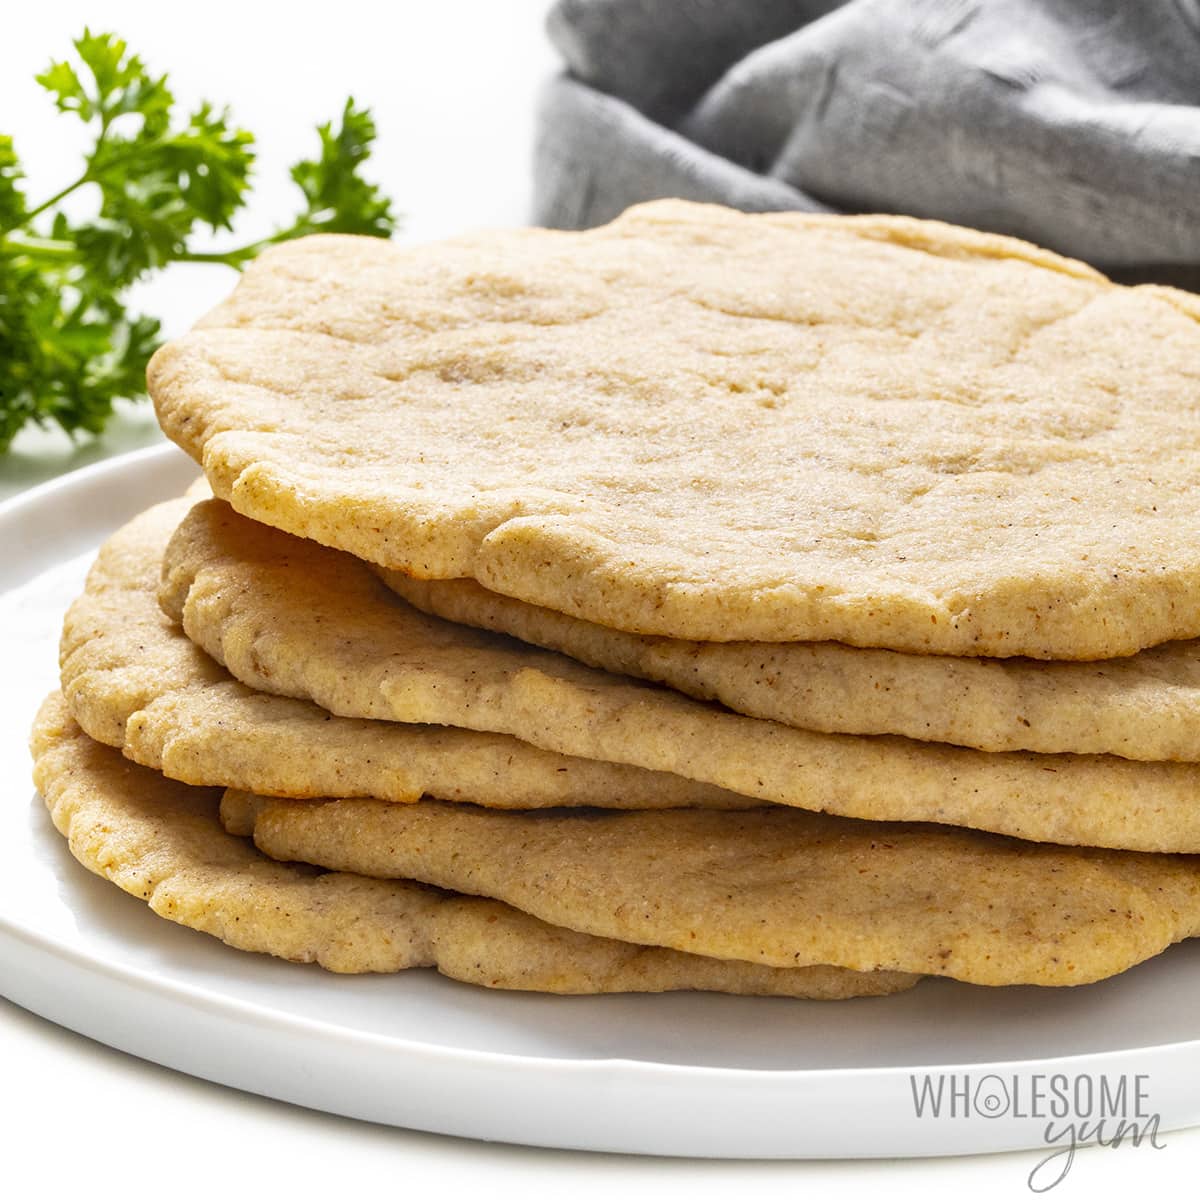 Stack of low carb flatbread rounds on a plate